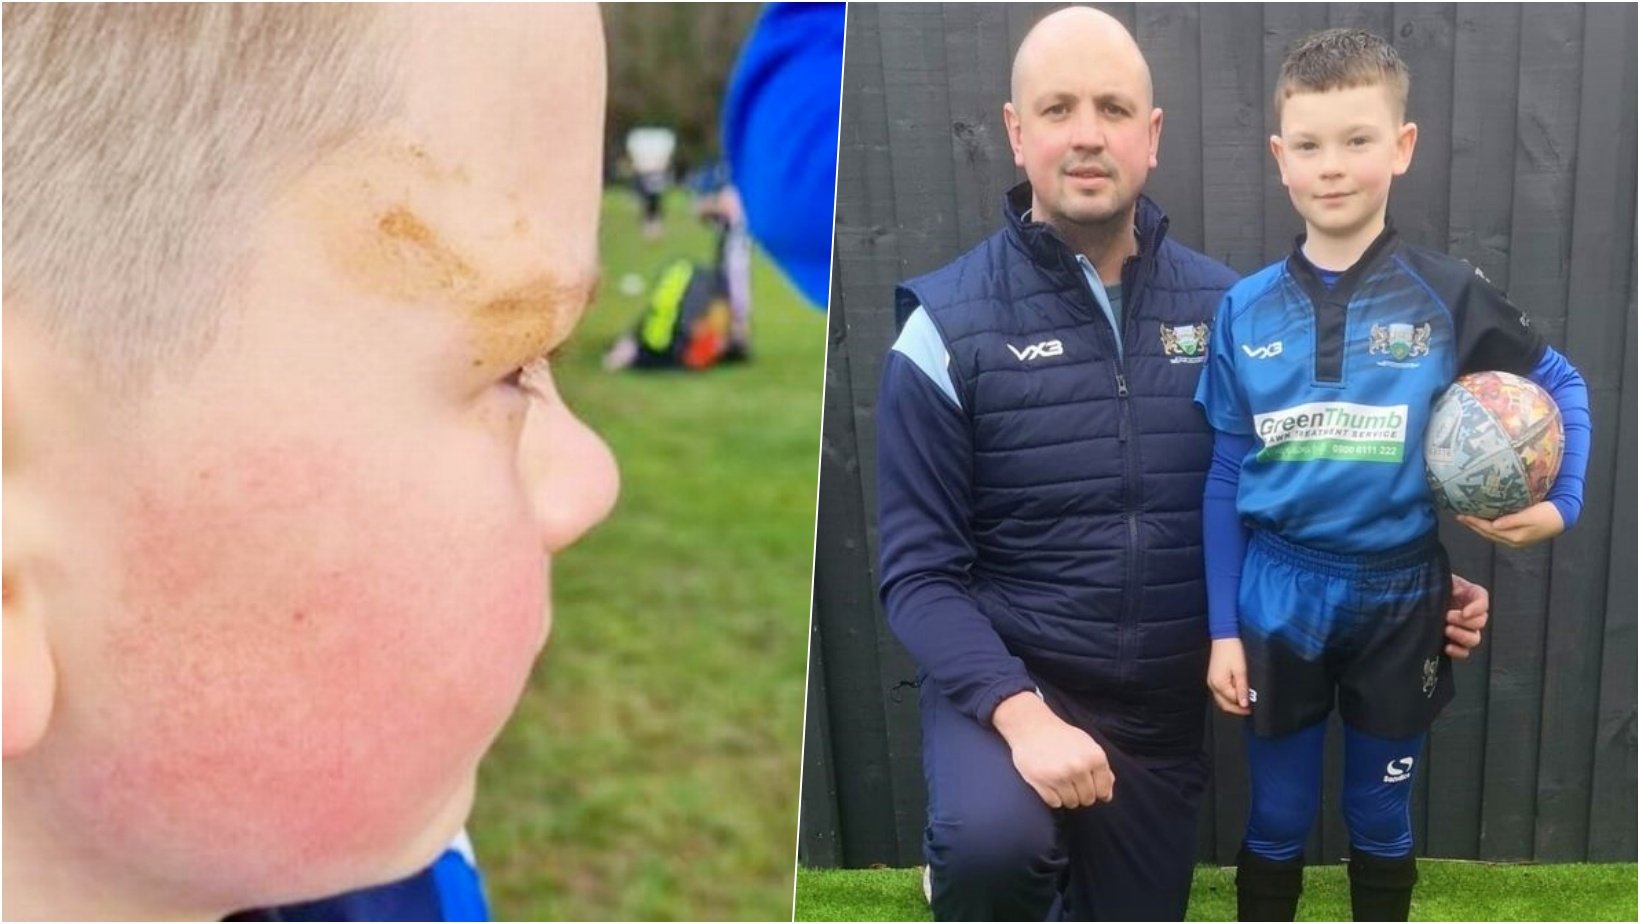 6 facebook cover 6.jpg?resize=412,232 - Boy Has Slipped And Fell On MUD While Playing Rugby Game But His Dad Knew It Was Much Worse